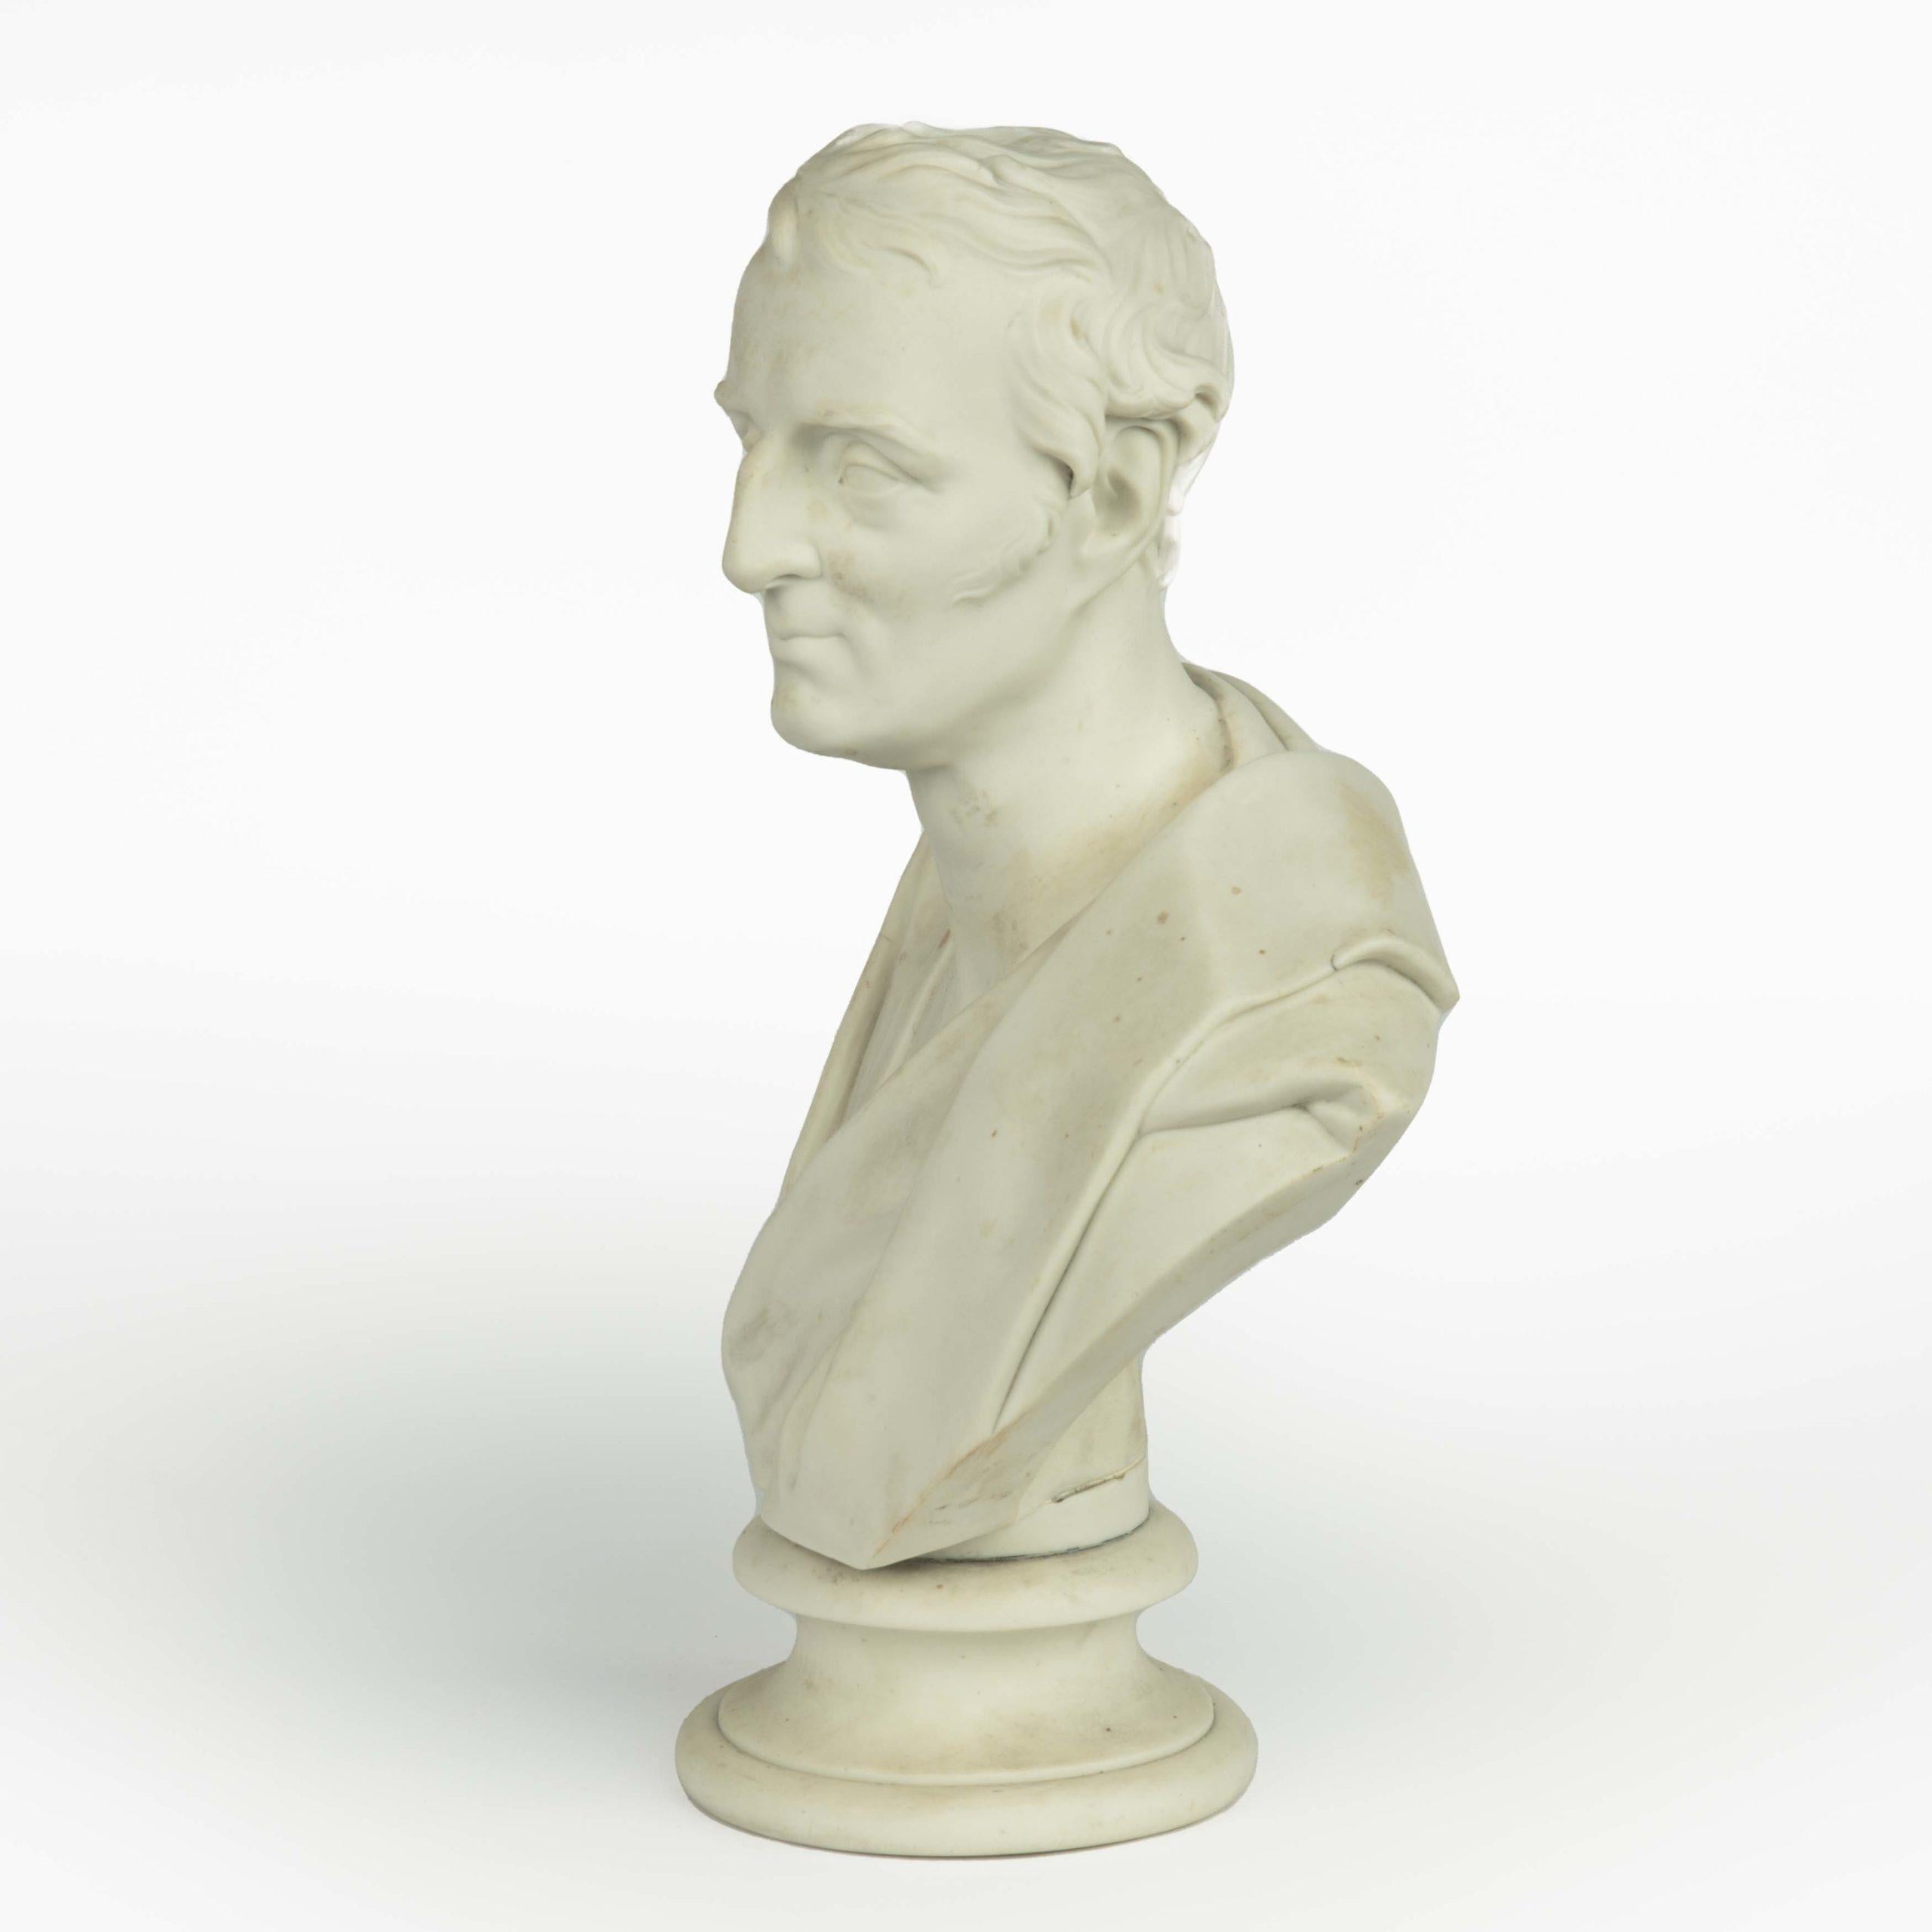 A white Parianware bust of the Duke of Wellington by E W Wyon, the Duke is shown in classical draperies looking slightly to the left, the reverse impressed ‘E.W. Wyon & F,.  English, 1853.

It seems that it was produced in 1853 as a posthumous